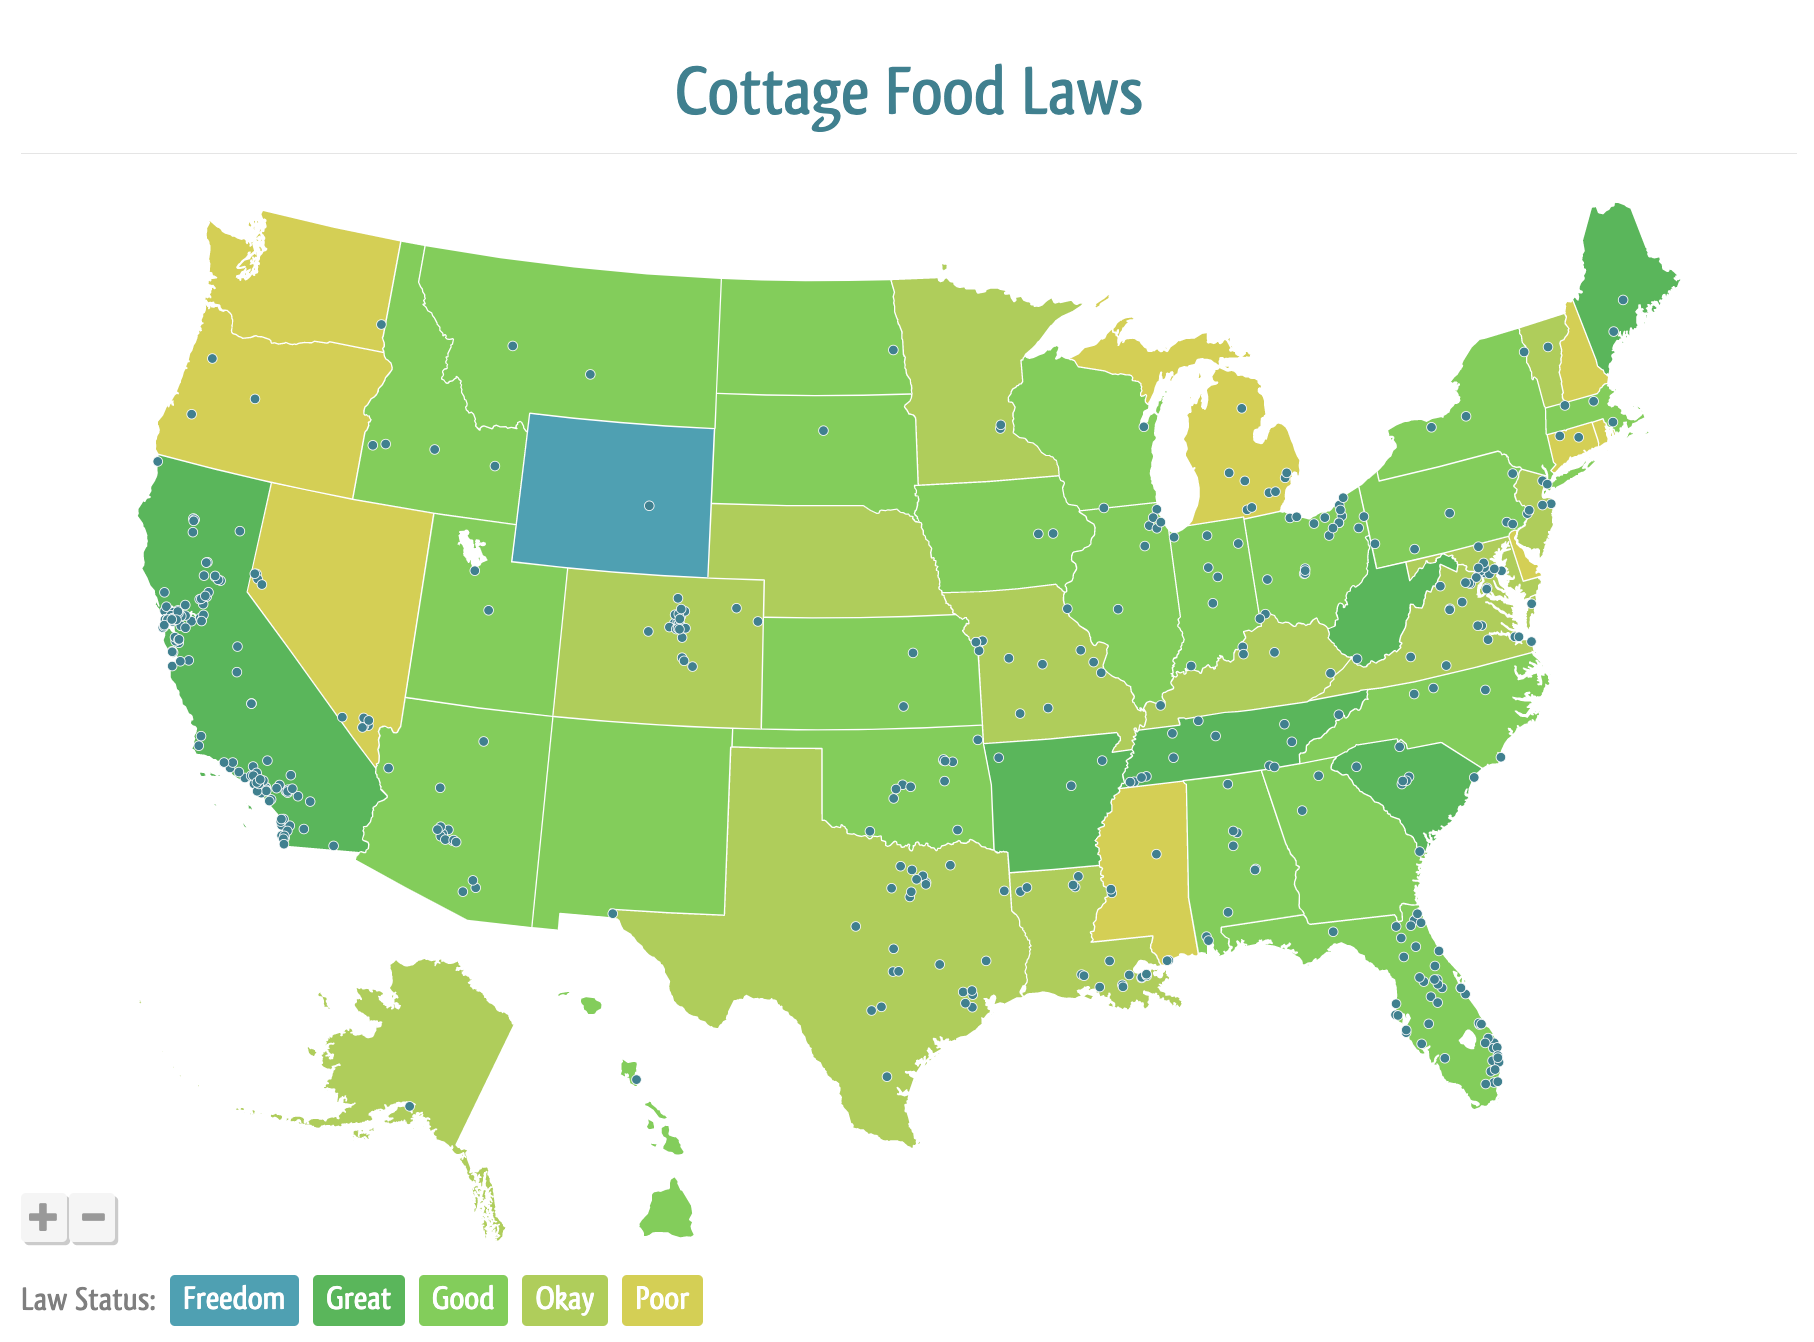 Screenshot from Forrager.com - Cottage foods allowed in Florida - cuttingforbusiness.com.